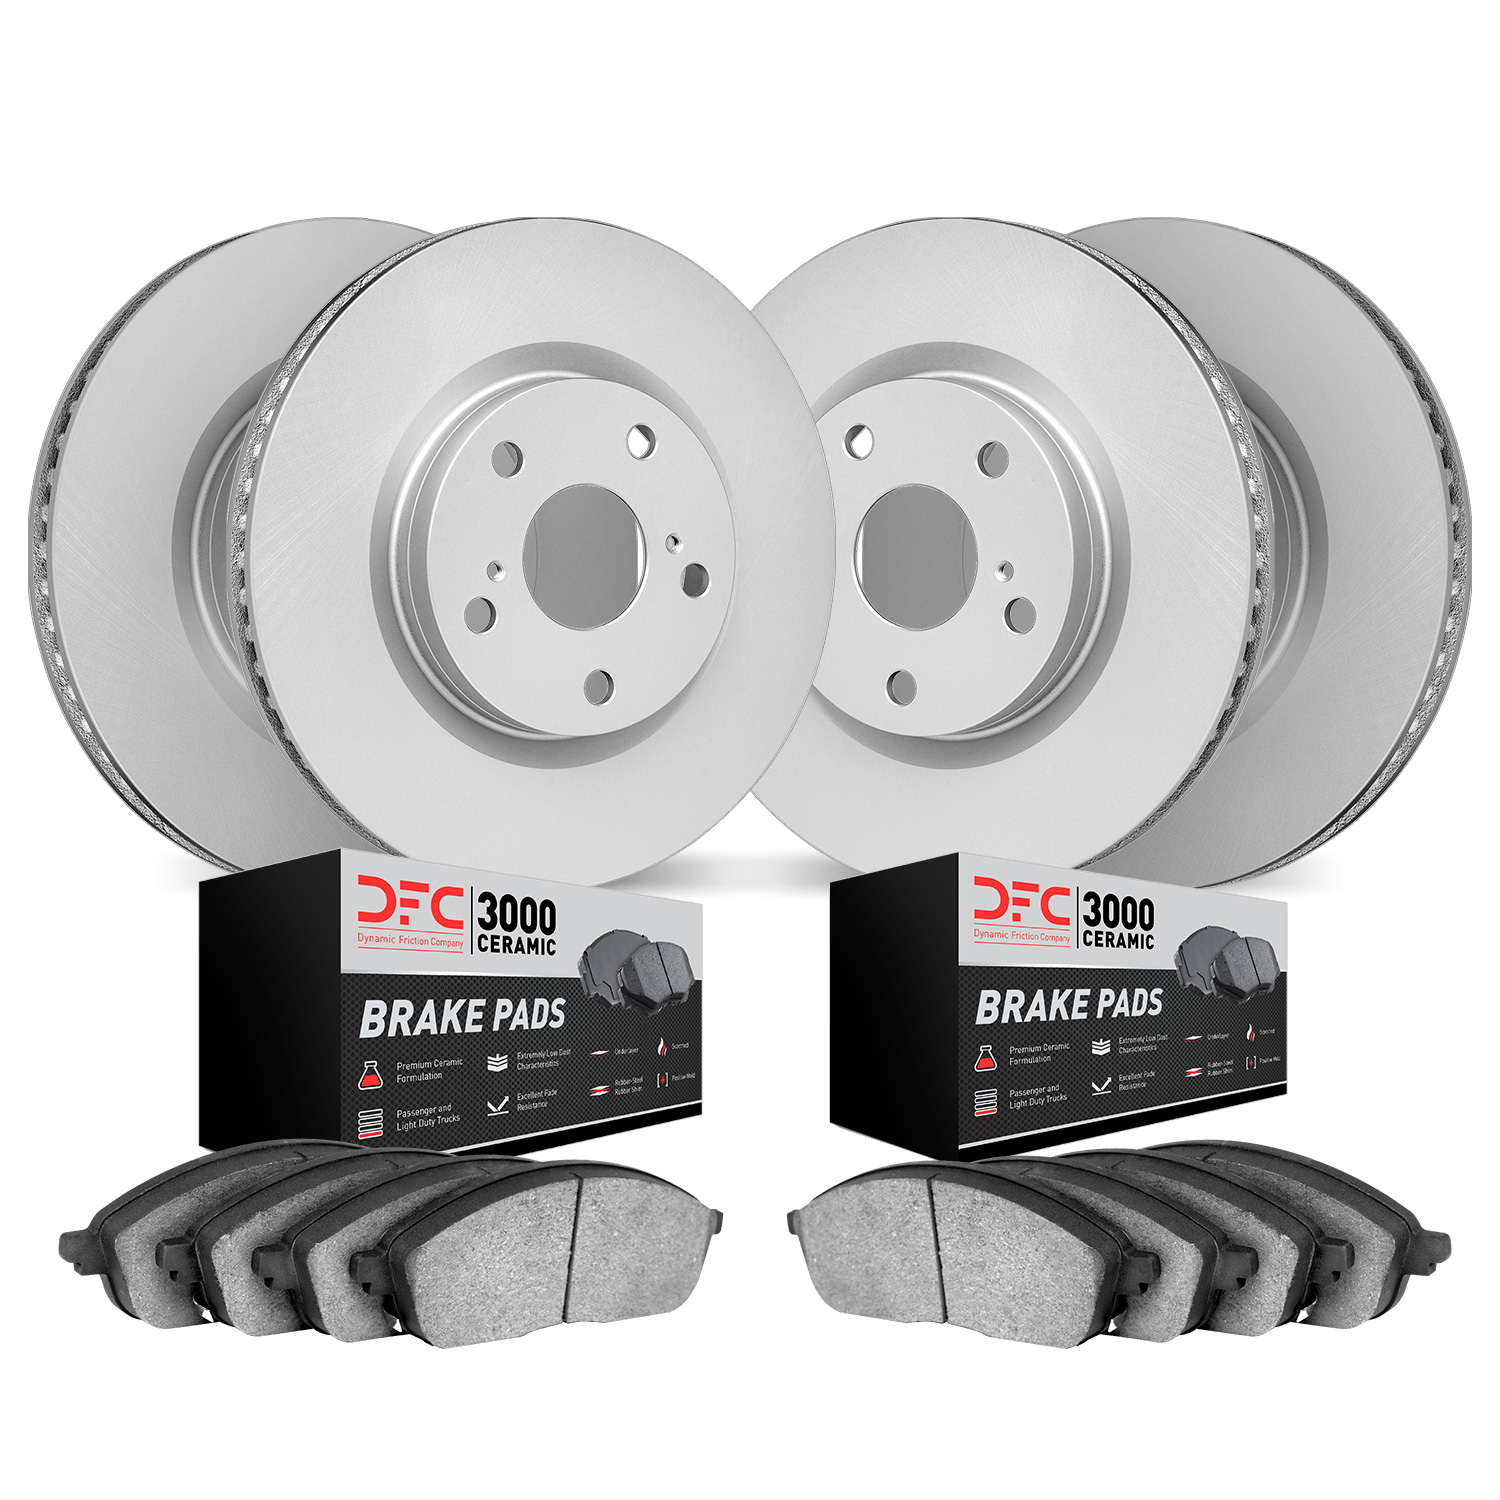 4304-31054 Geospec Brake Rotors with 3000-Series Ceramic Brake Pads Kit, 2009-2017 BMW, Position: Front and Rear